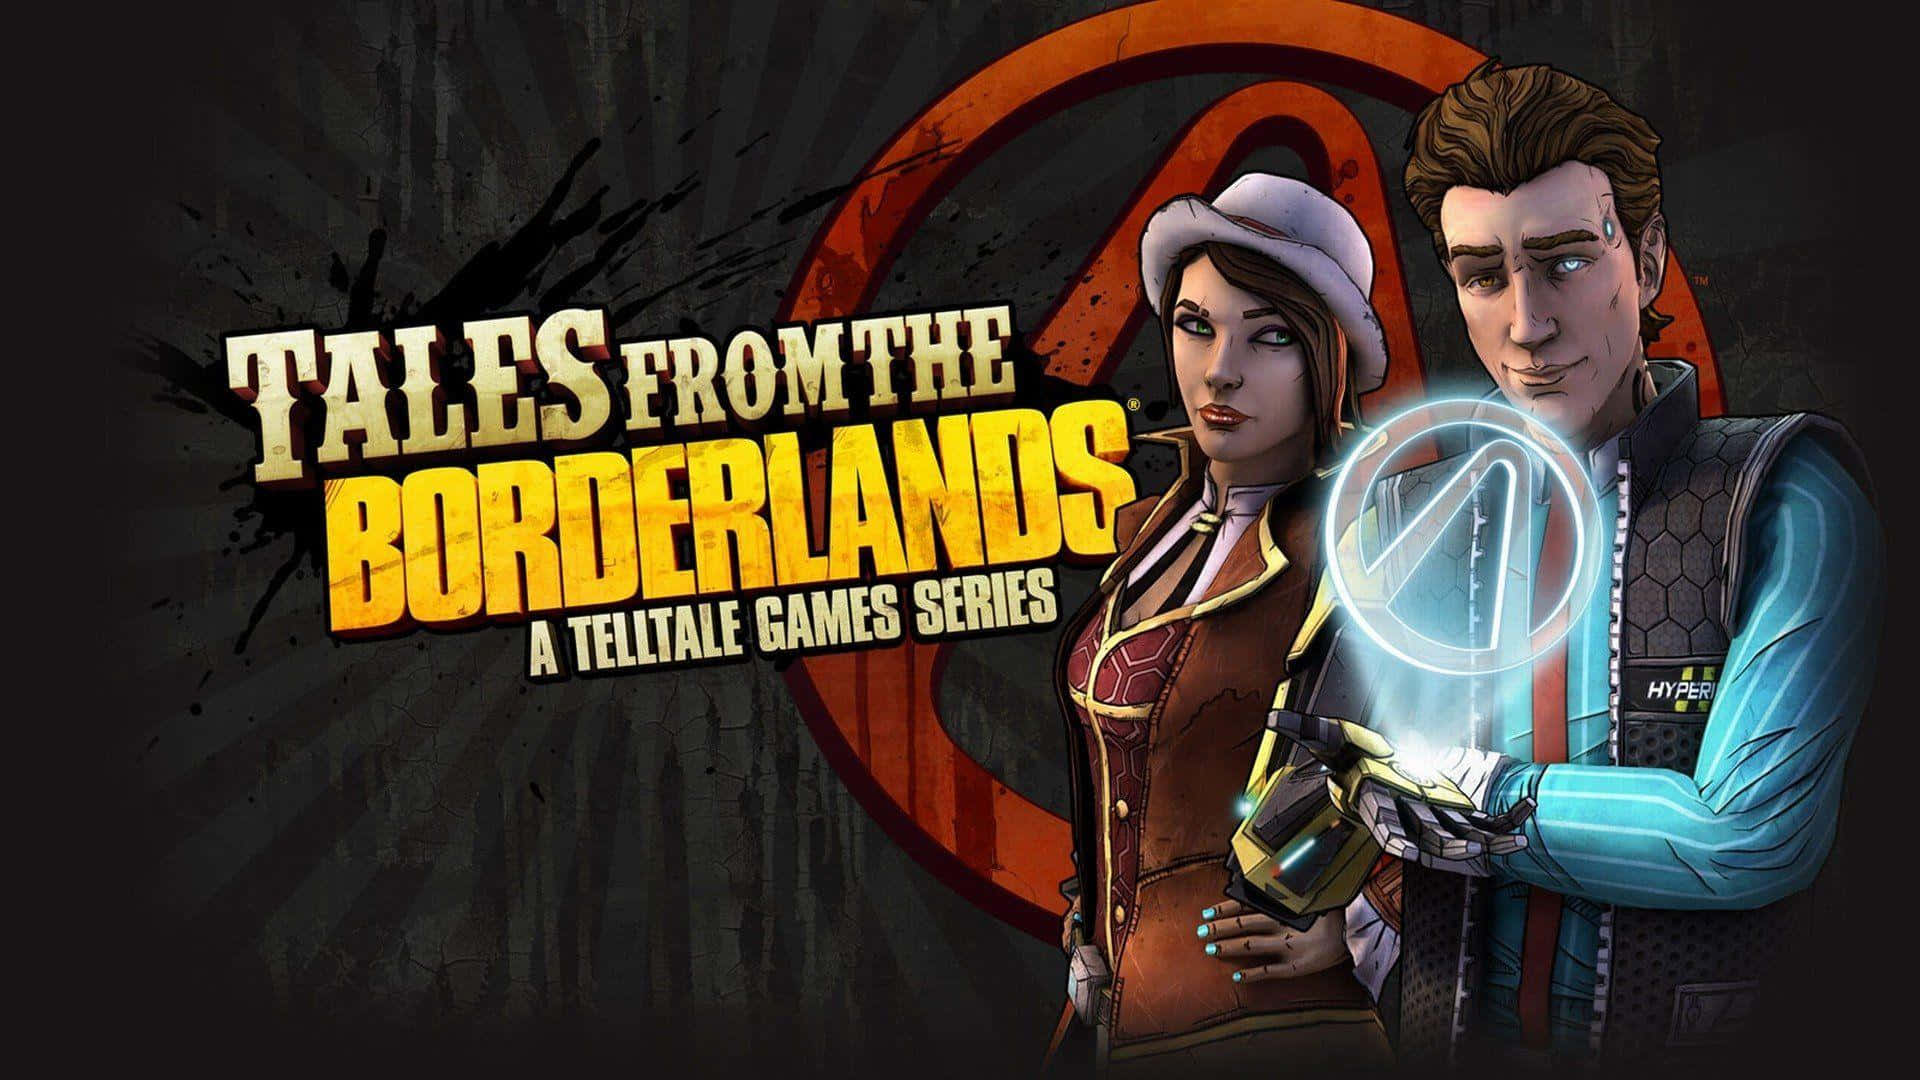 Exciting action-packed Borderlands gameplay featuring epic battles and unique characters